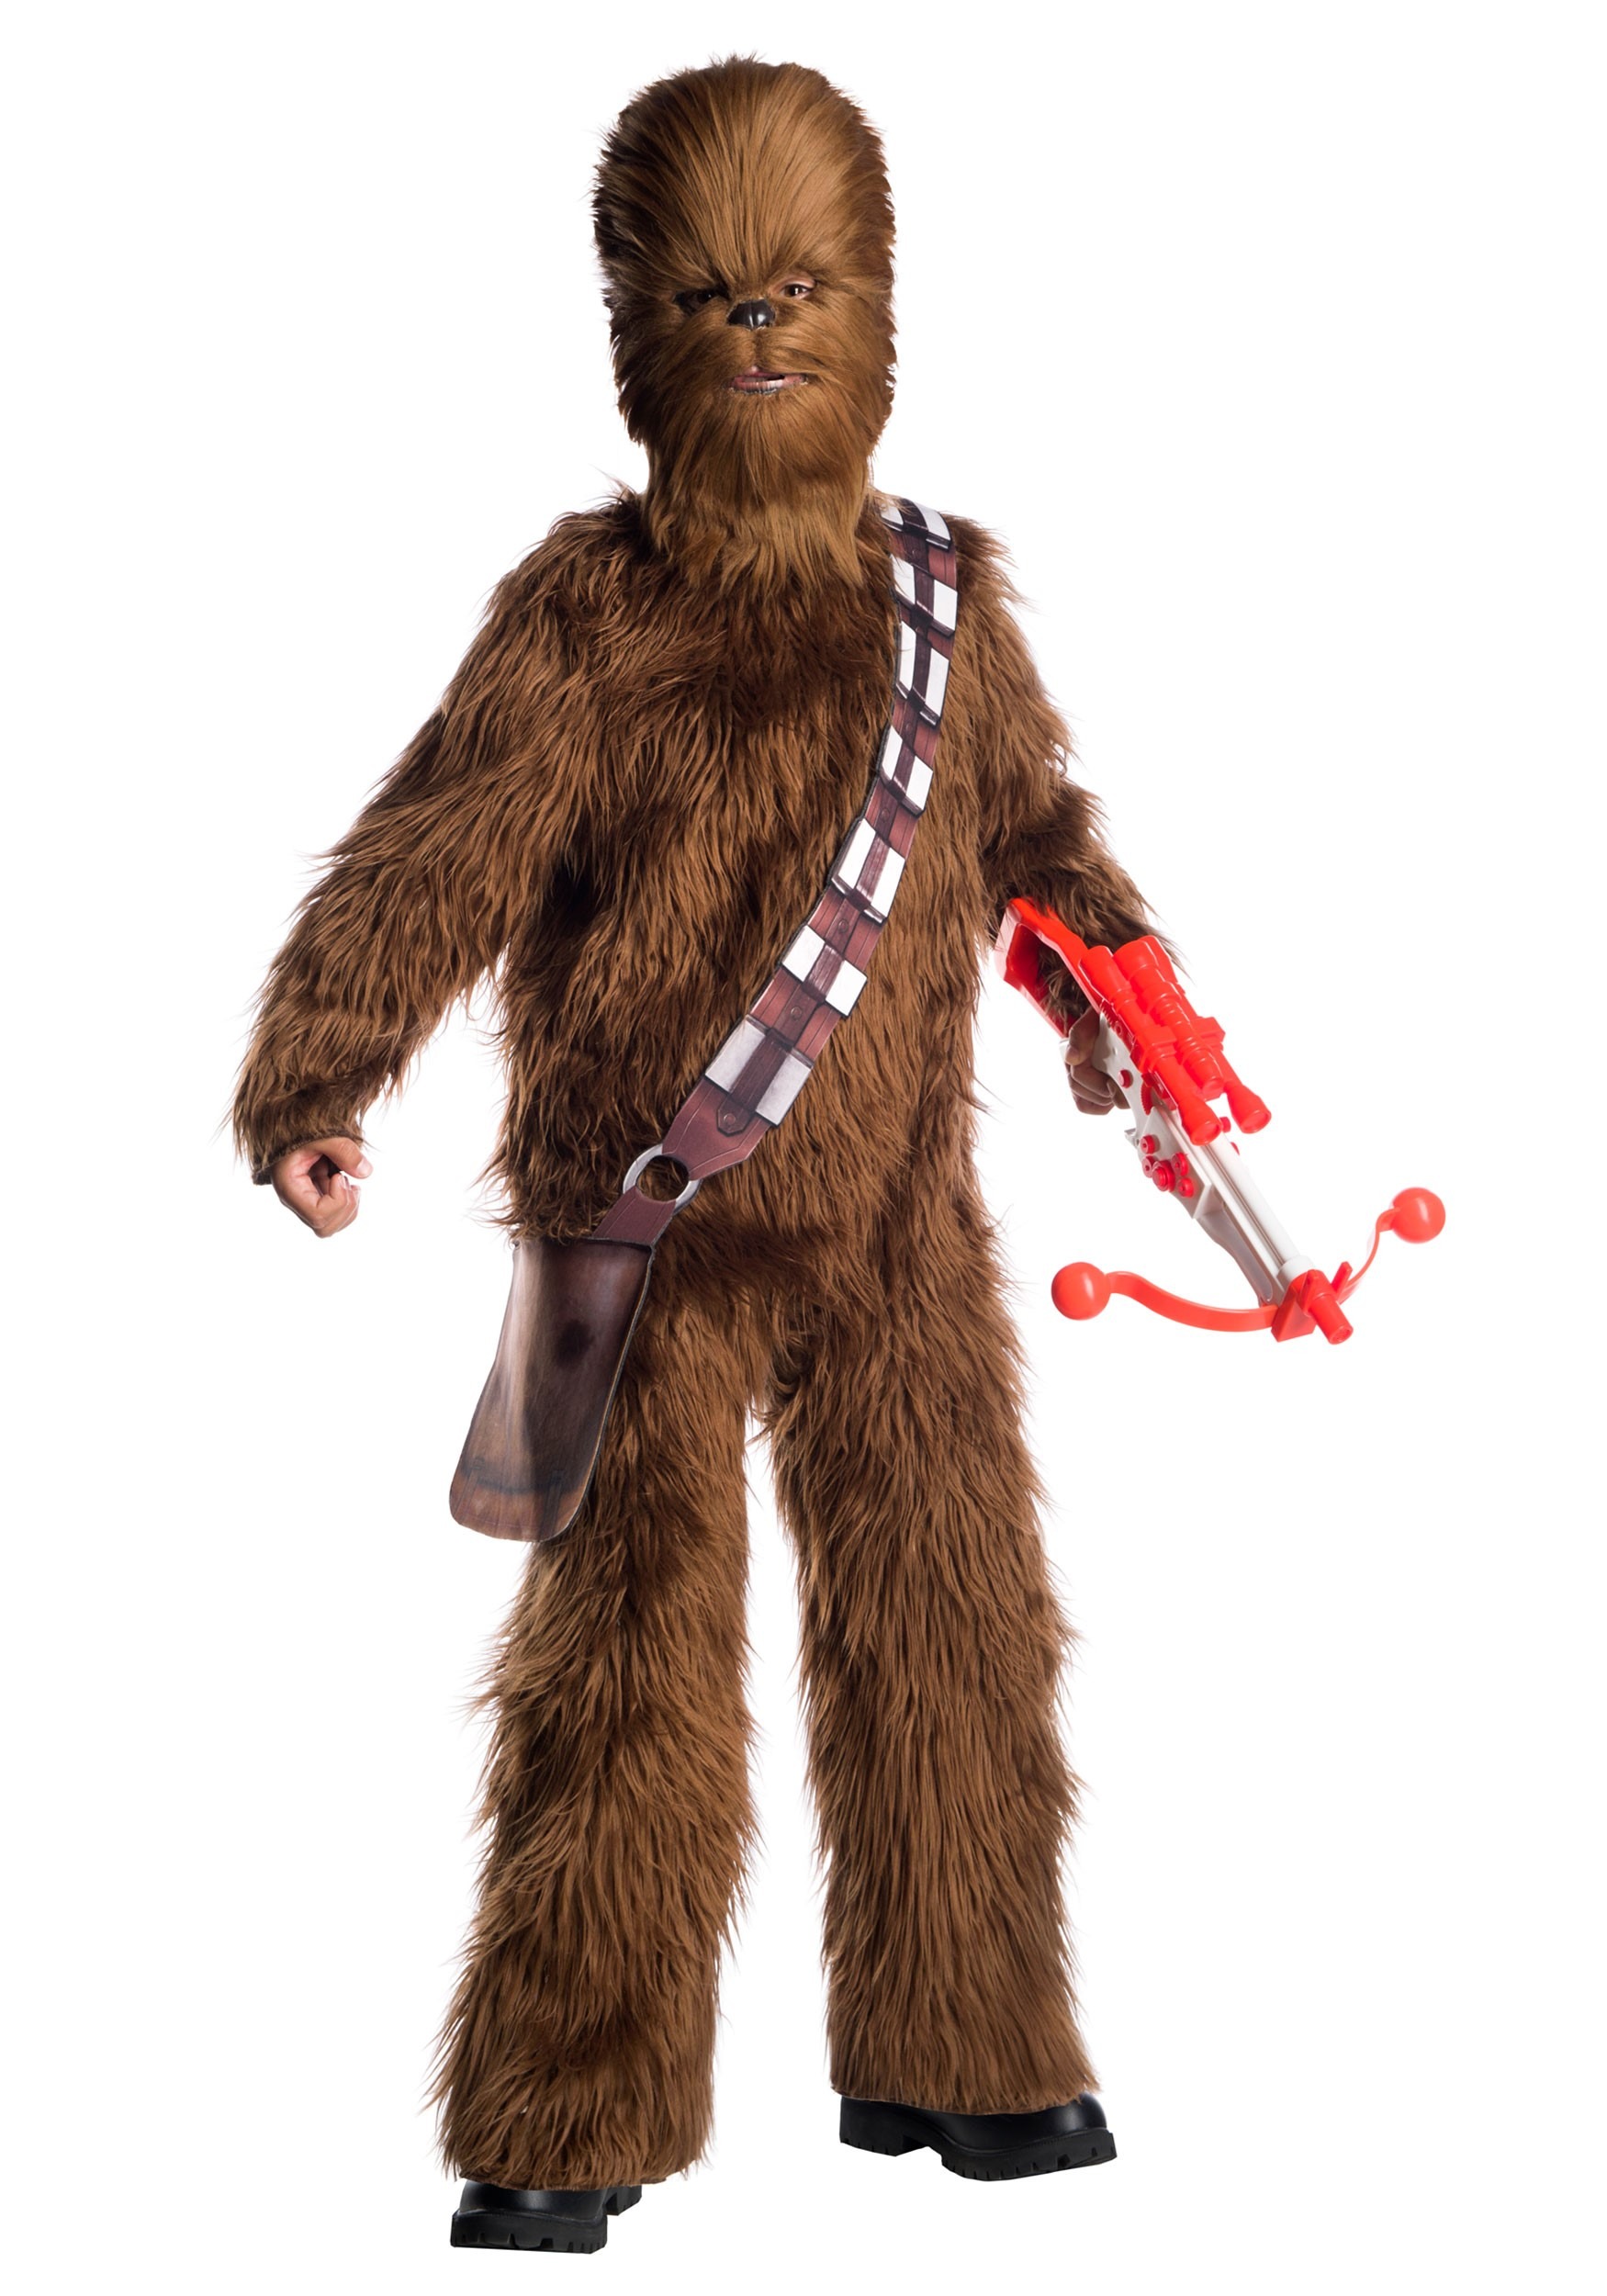 leftovers Manifestation cycle Star Wars Kids Chewbacca Deluxe Costume